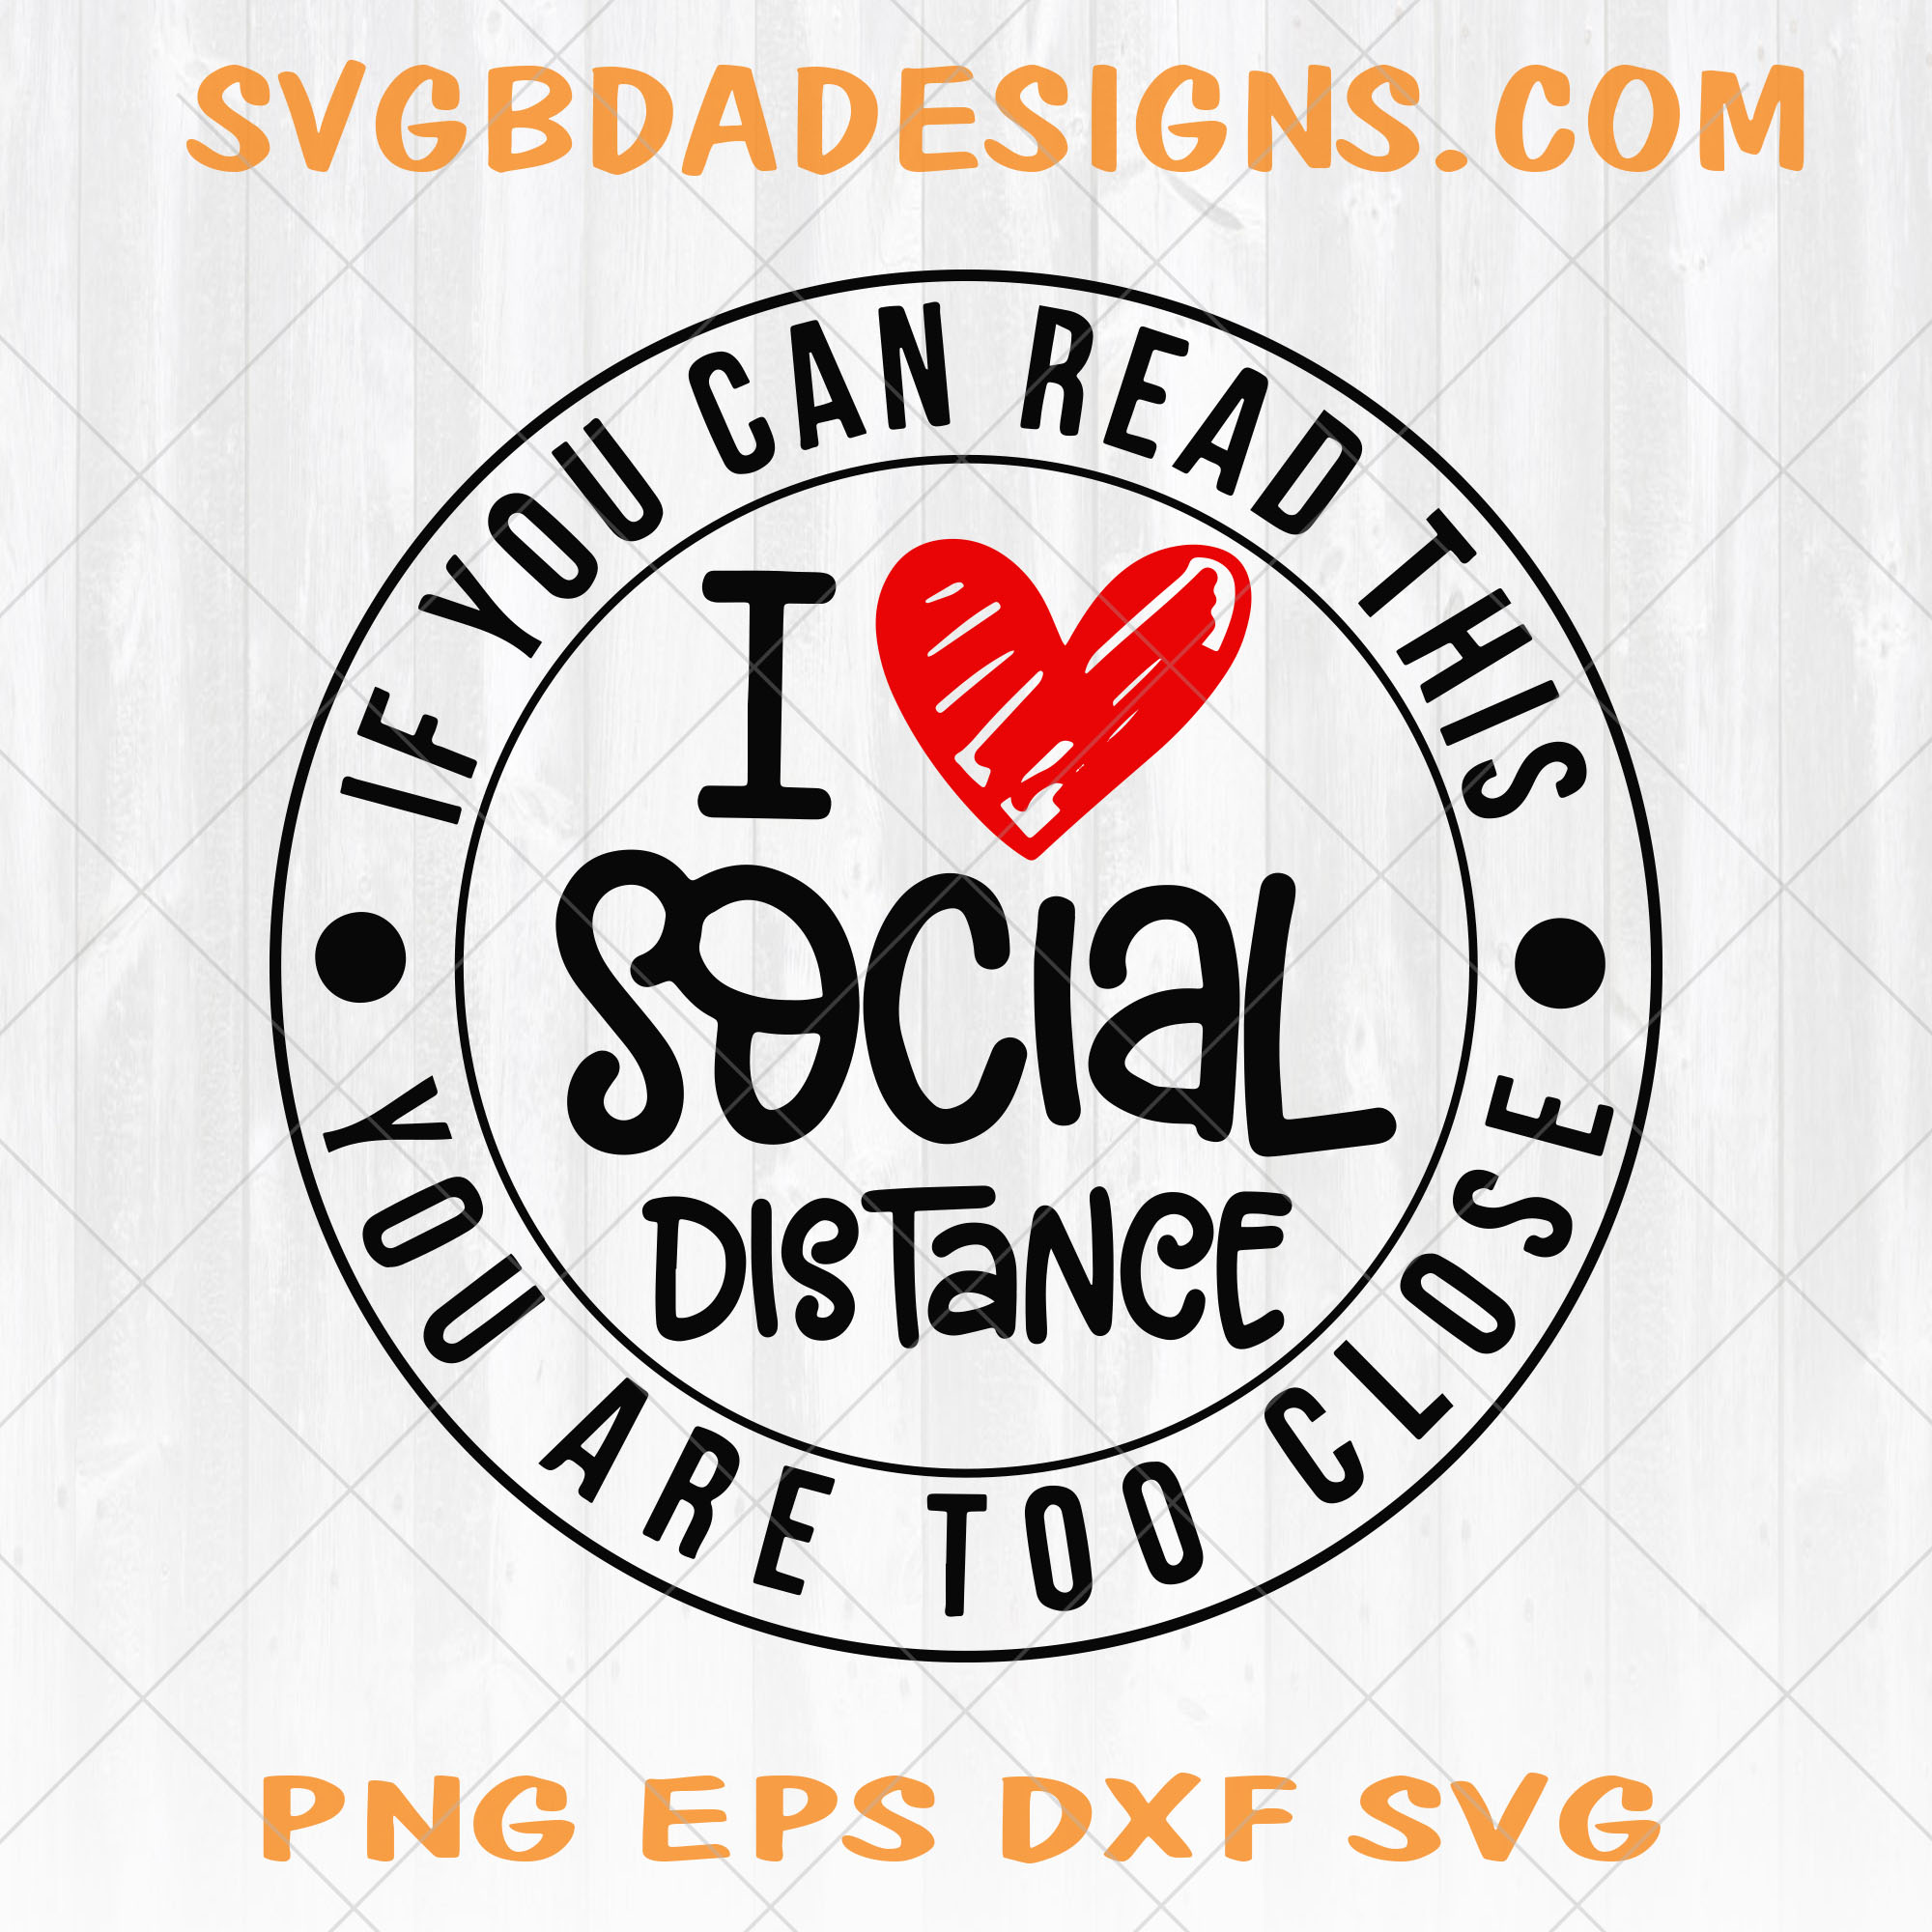 If You Can Read This You are Too Close SVG - If You Can Read This You are Too Close - Social Distancing SVG - I Love Social Distance SVG - Digital Download